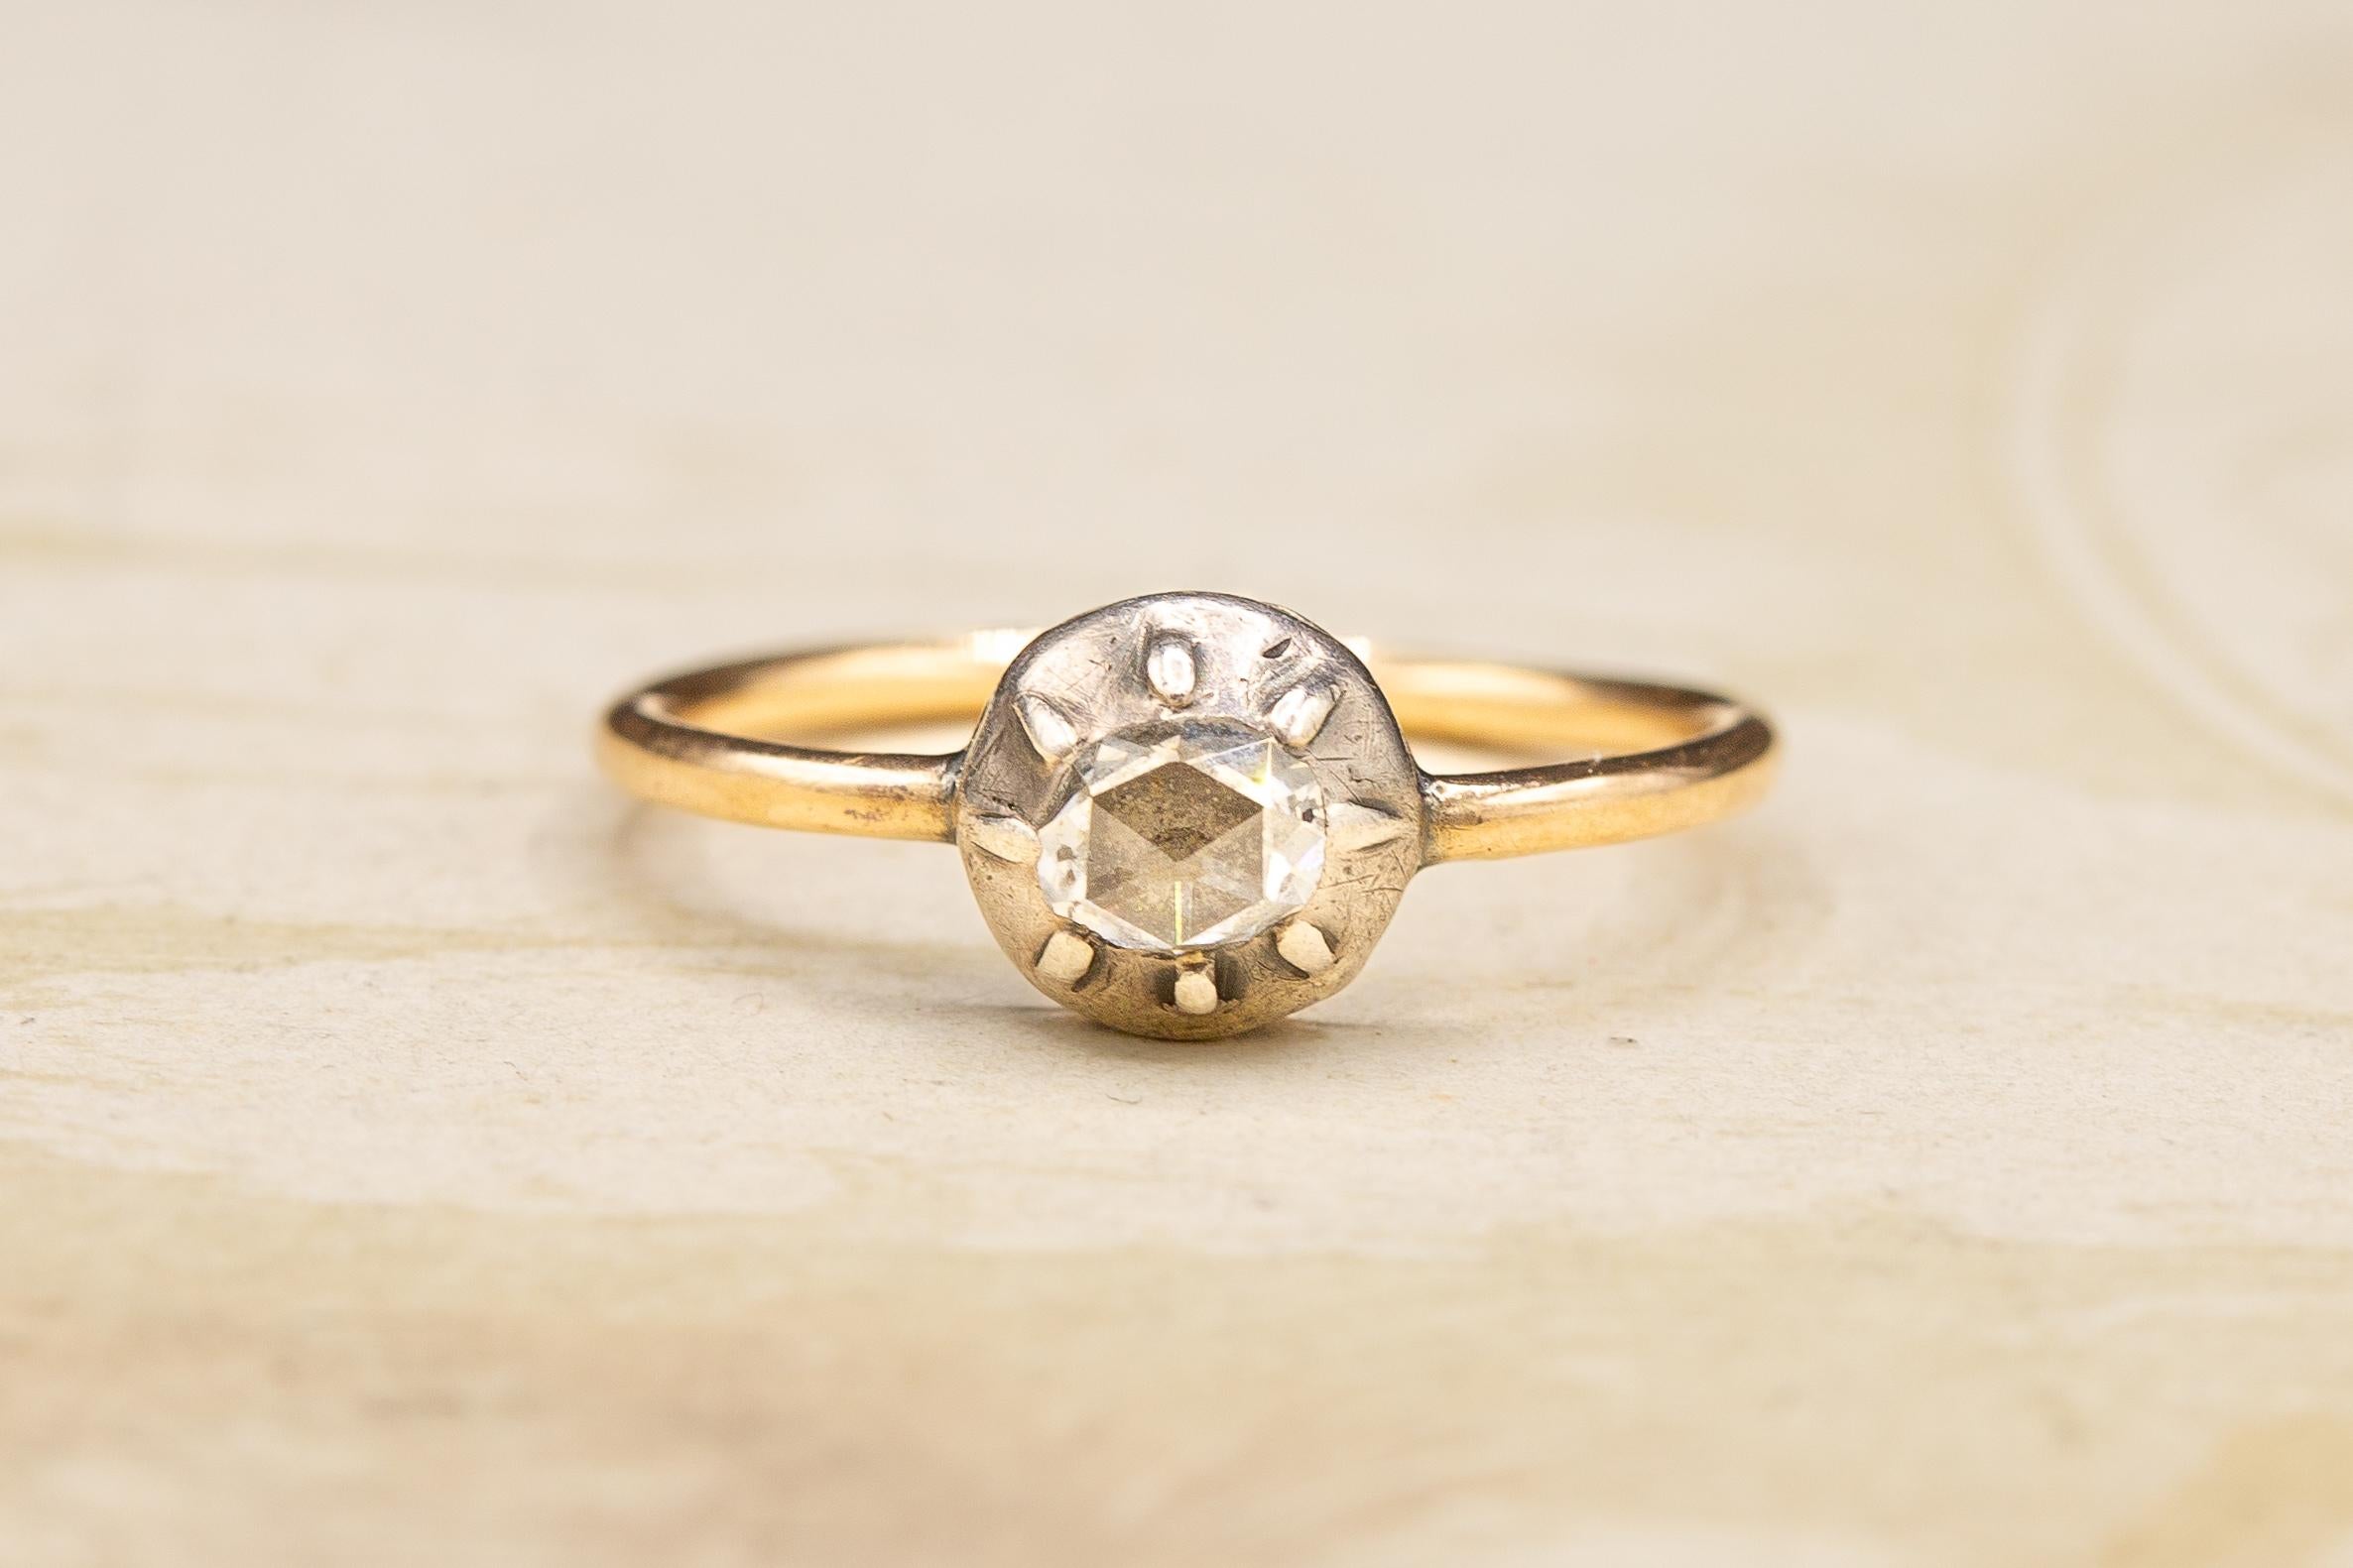 This beautiful antique diamond solitaire ring  was made in France and dates from the very early 19th century, circa 1820. 

The ring is set with a fantastic domed rose cut diamond in a cut down collet silver setting. The diamond is foil-backed and